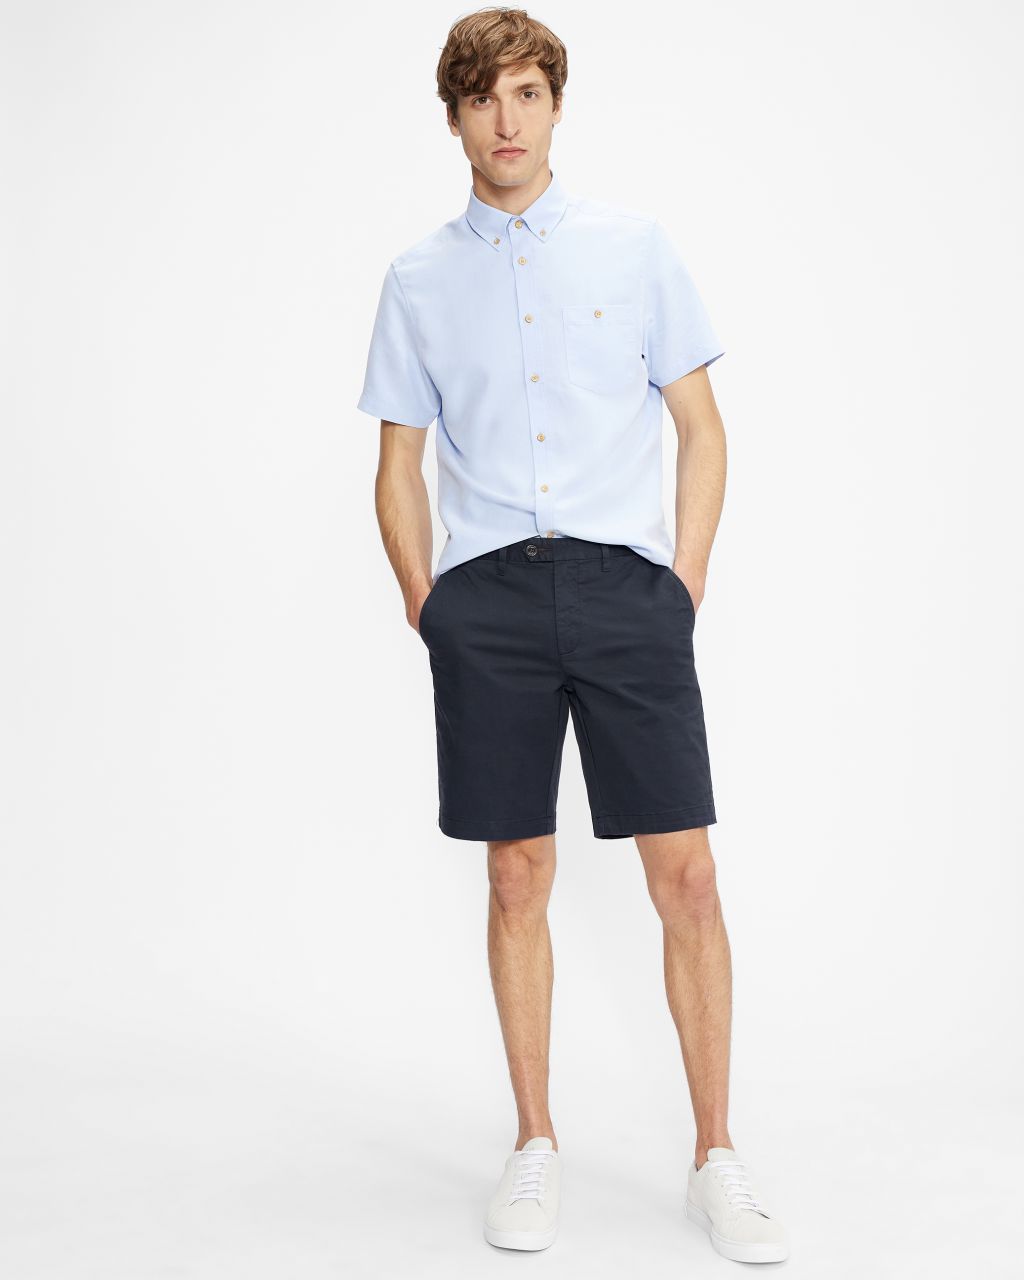 Ted Baker Men's Cotton Chino Shorts in Navy, Buenose